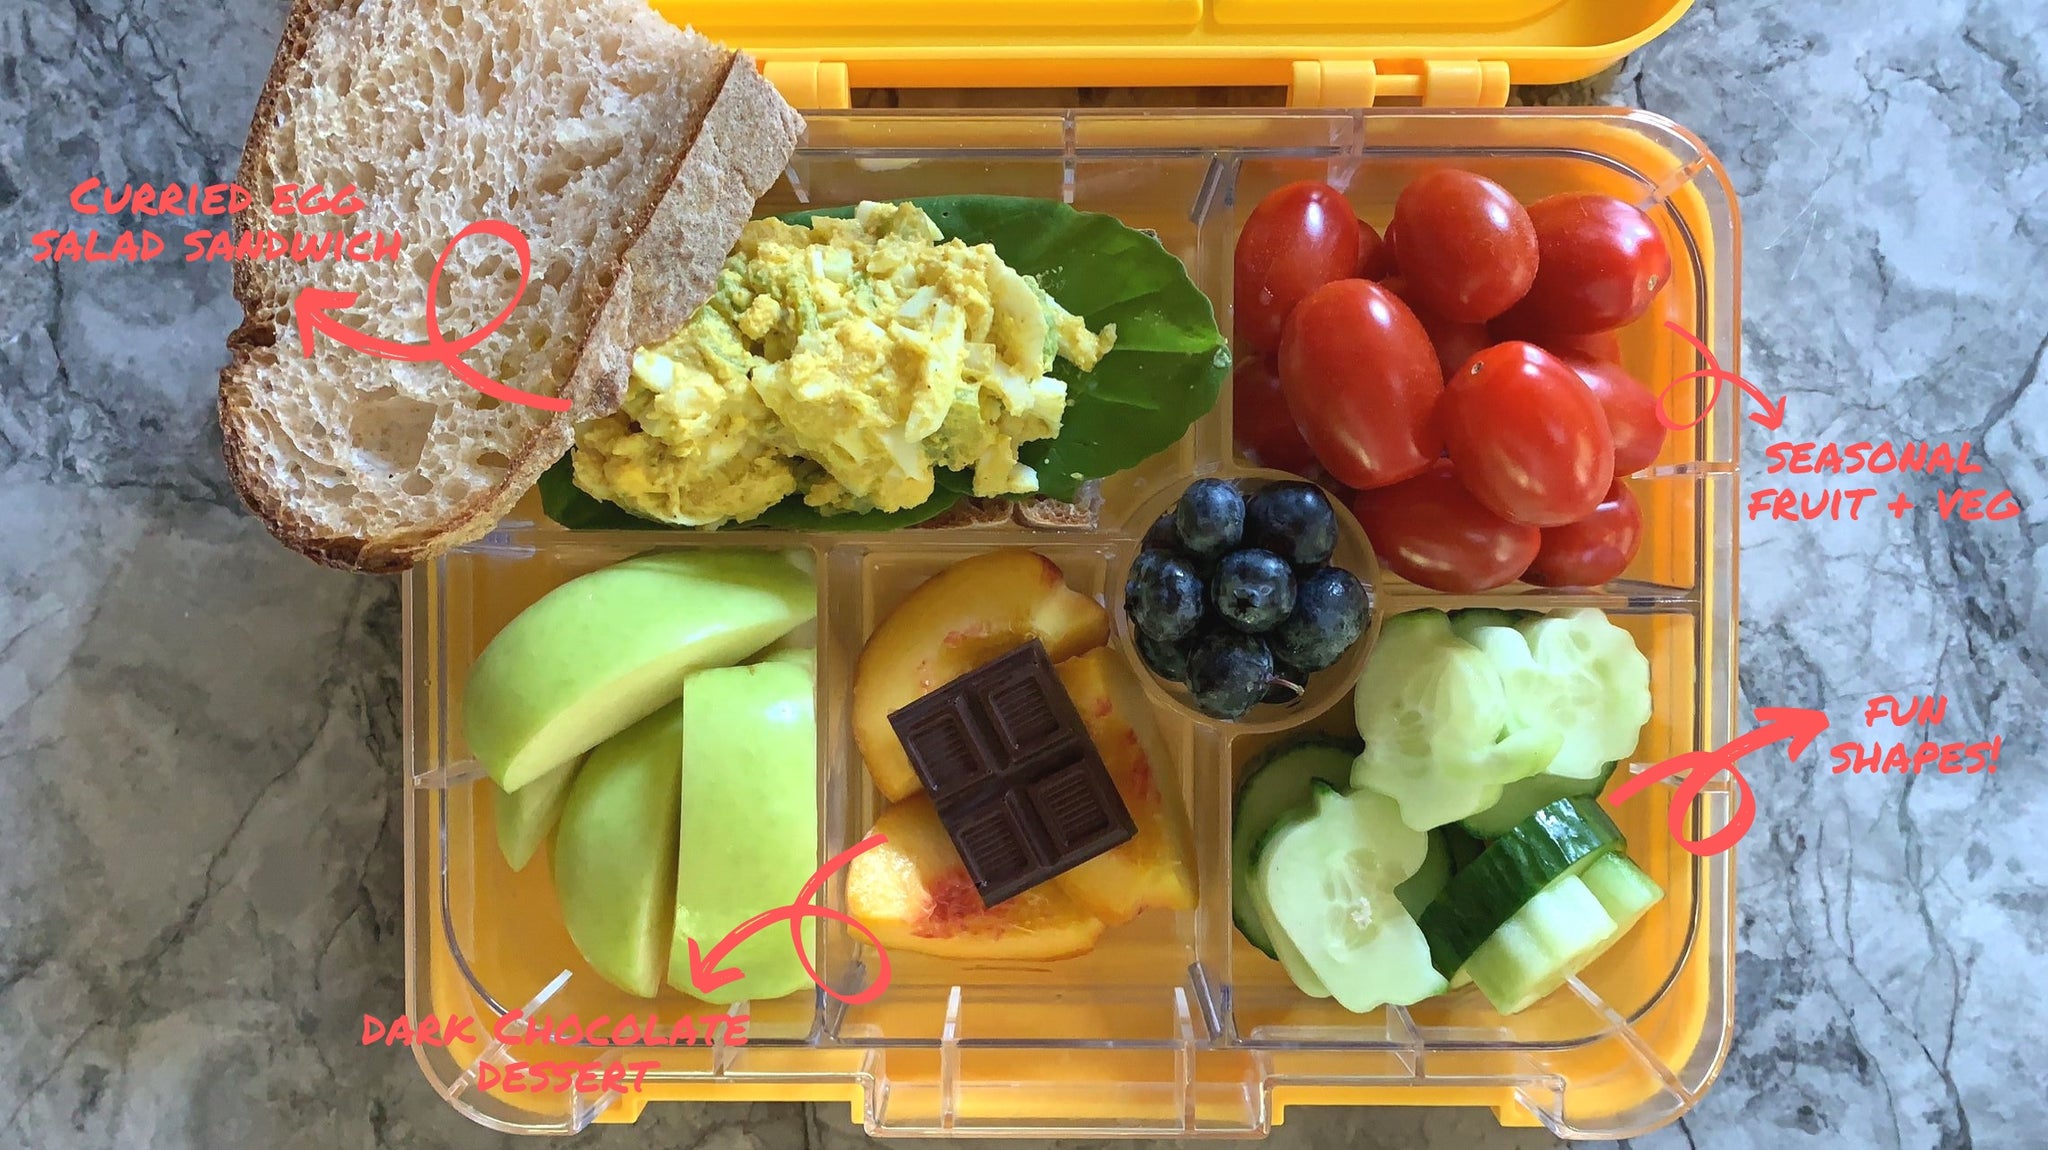 Sandwich bento box idea from Legacy Greens grocery store in downtown Kitchener